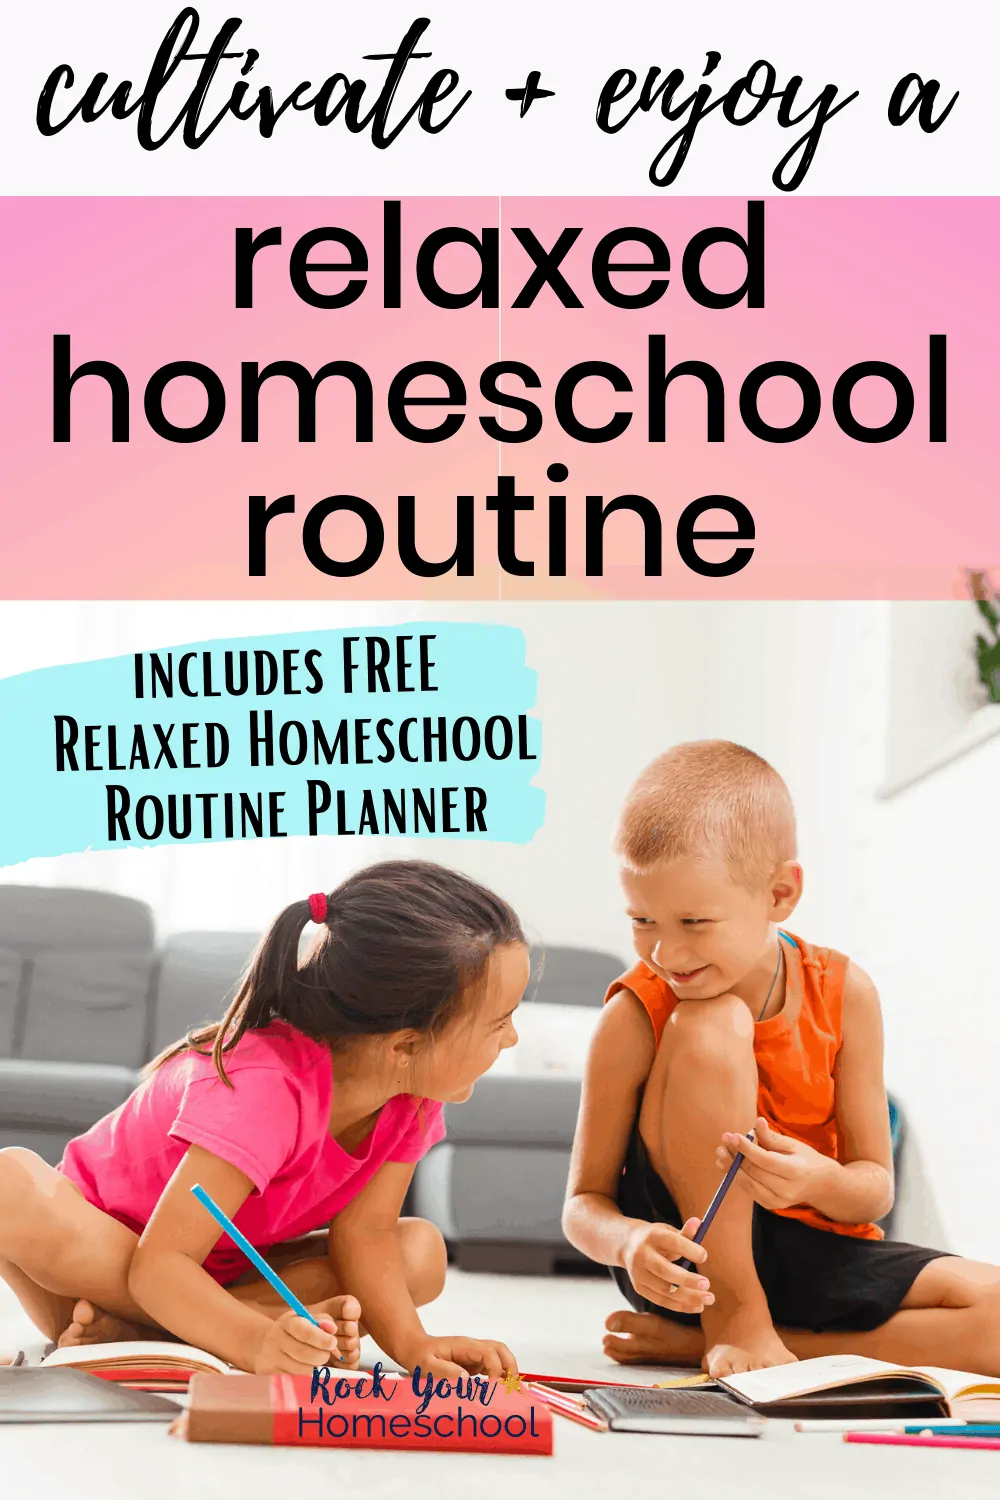 How to Cultivate & Enjoy a Relaxed Homeschool Routine